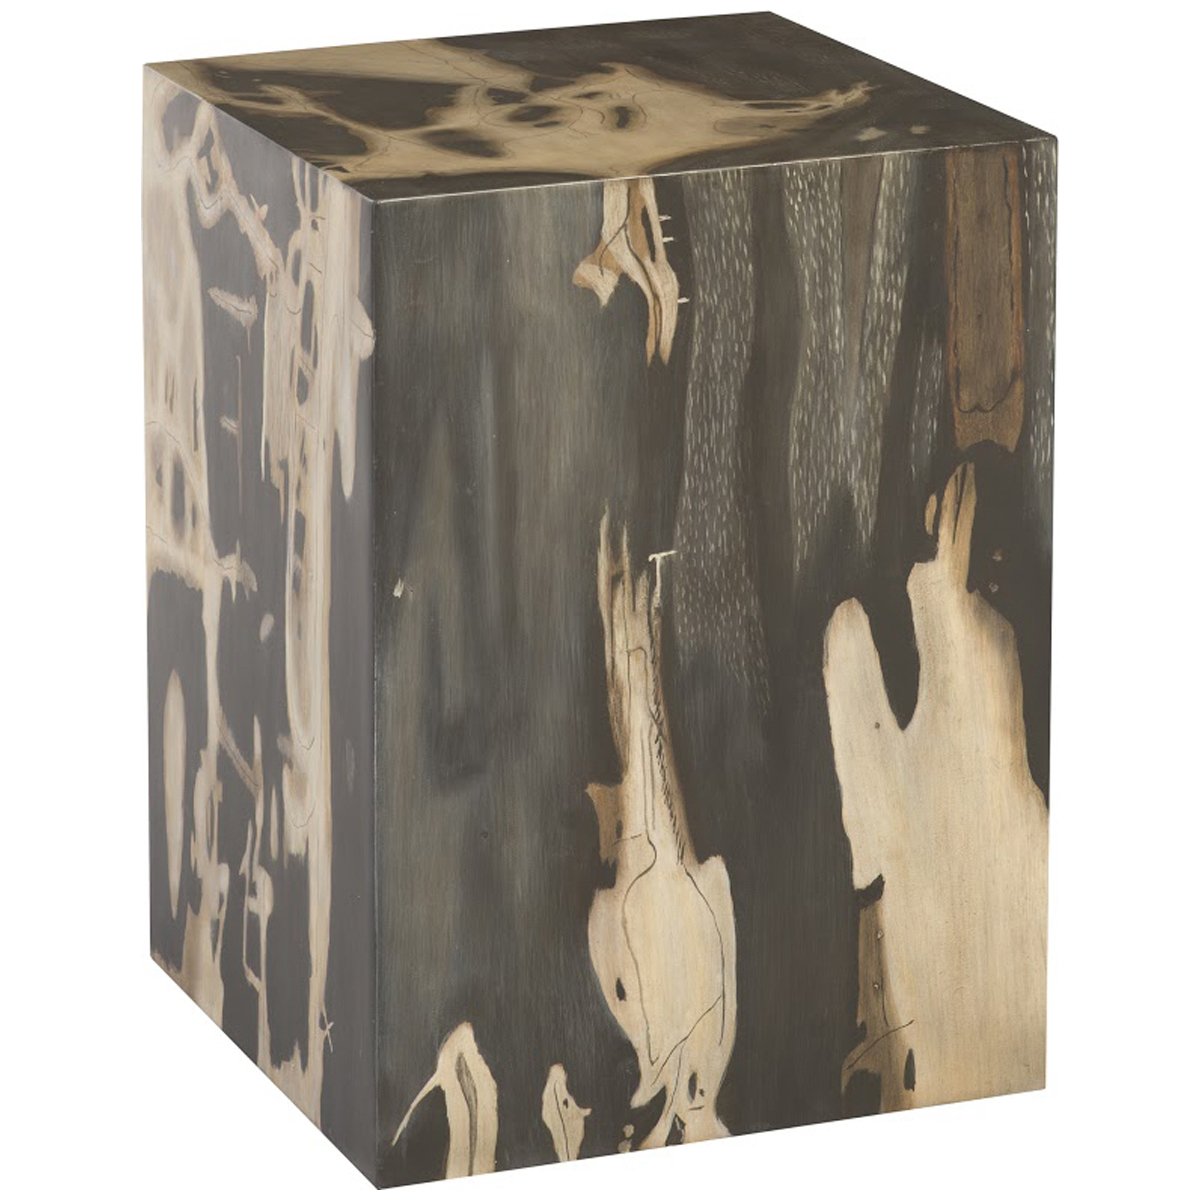 Phillips Collection Patterned Square Cast Petrified Wood Stool